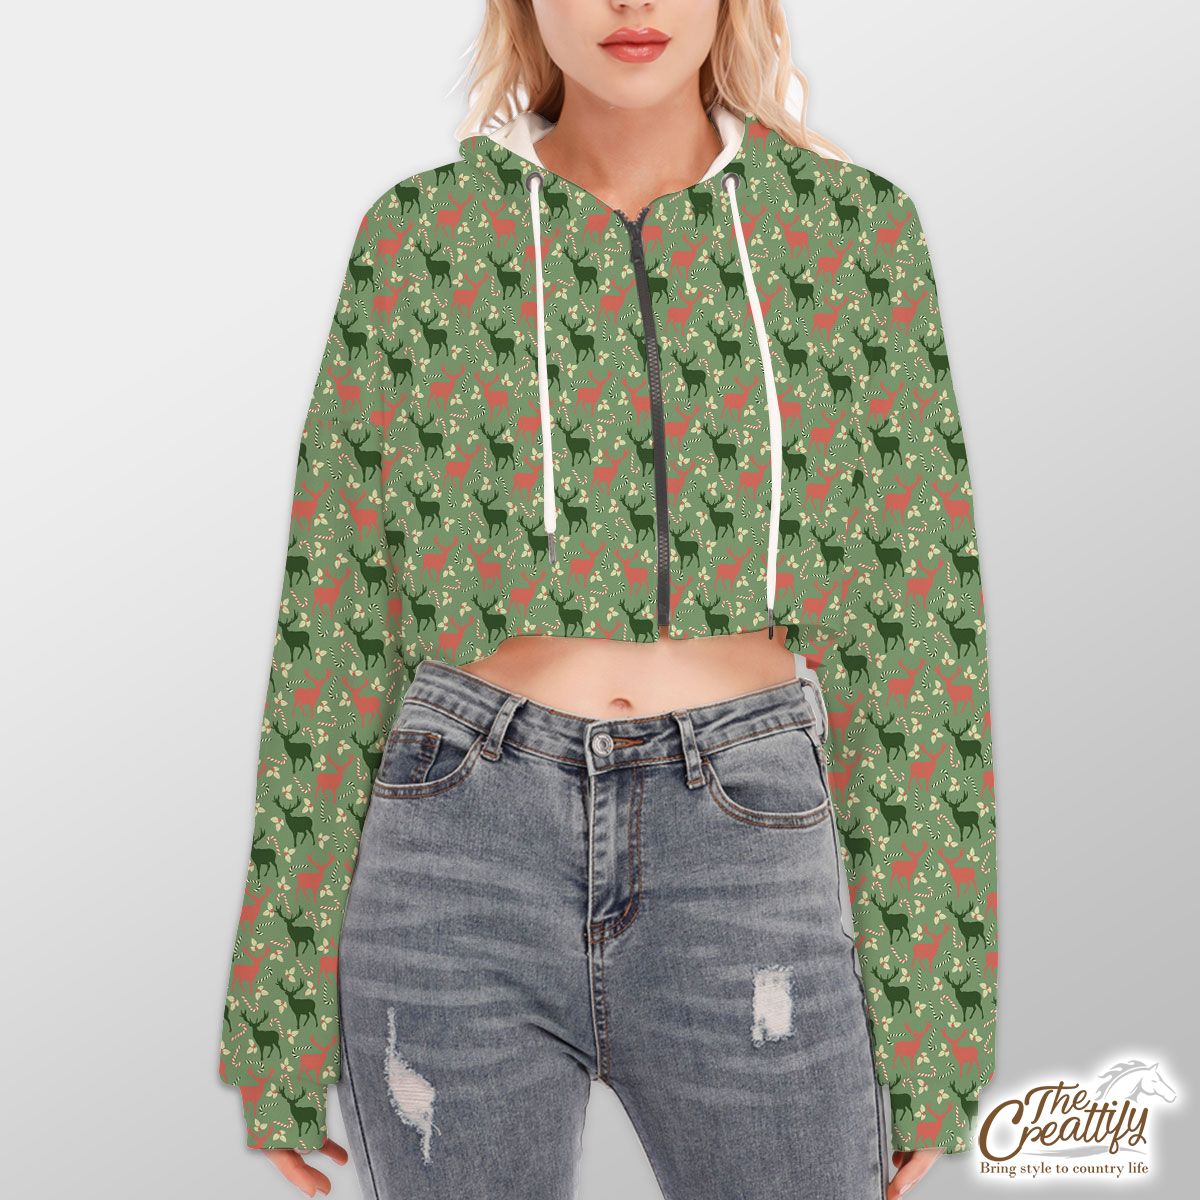 Reindeer, Christmas Flowers And Candy Canes Hoodie With Zipper Closure